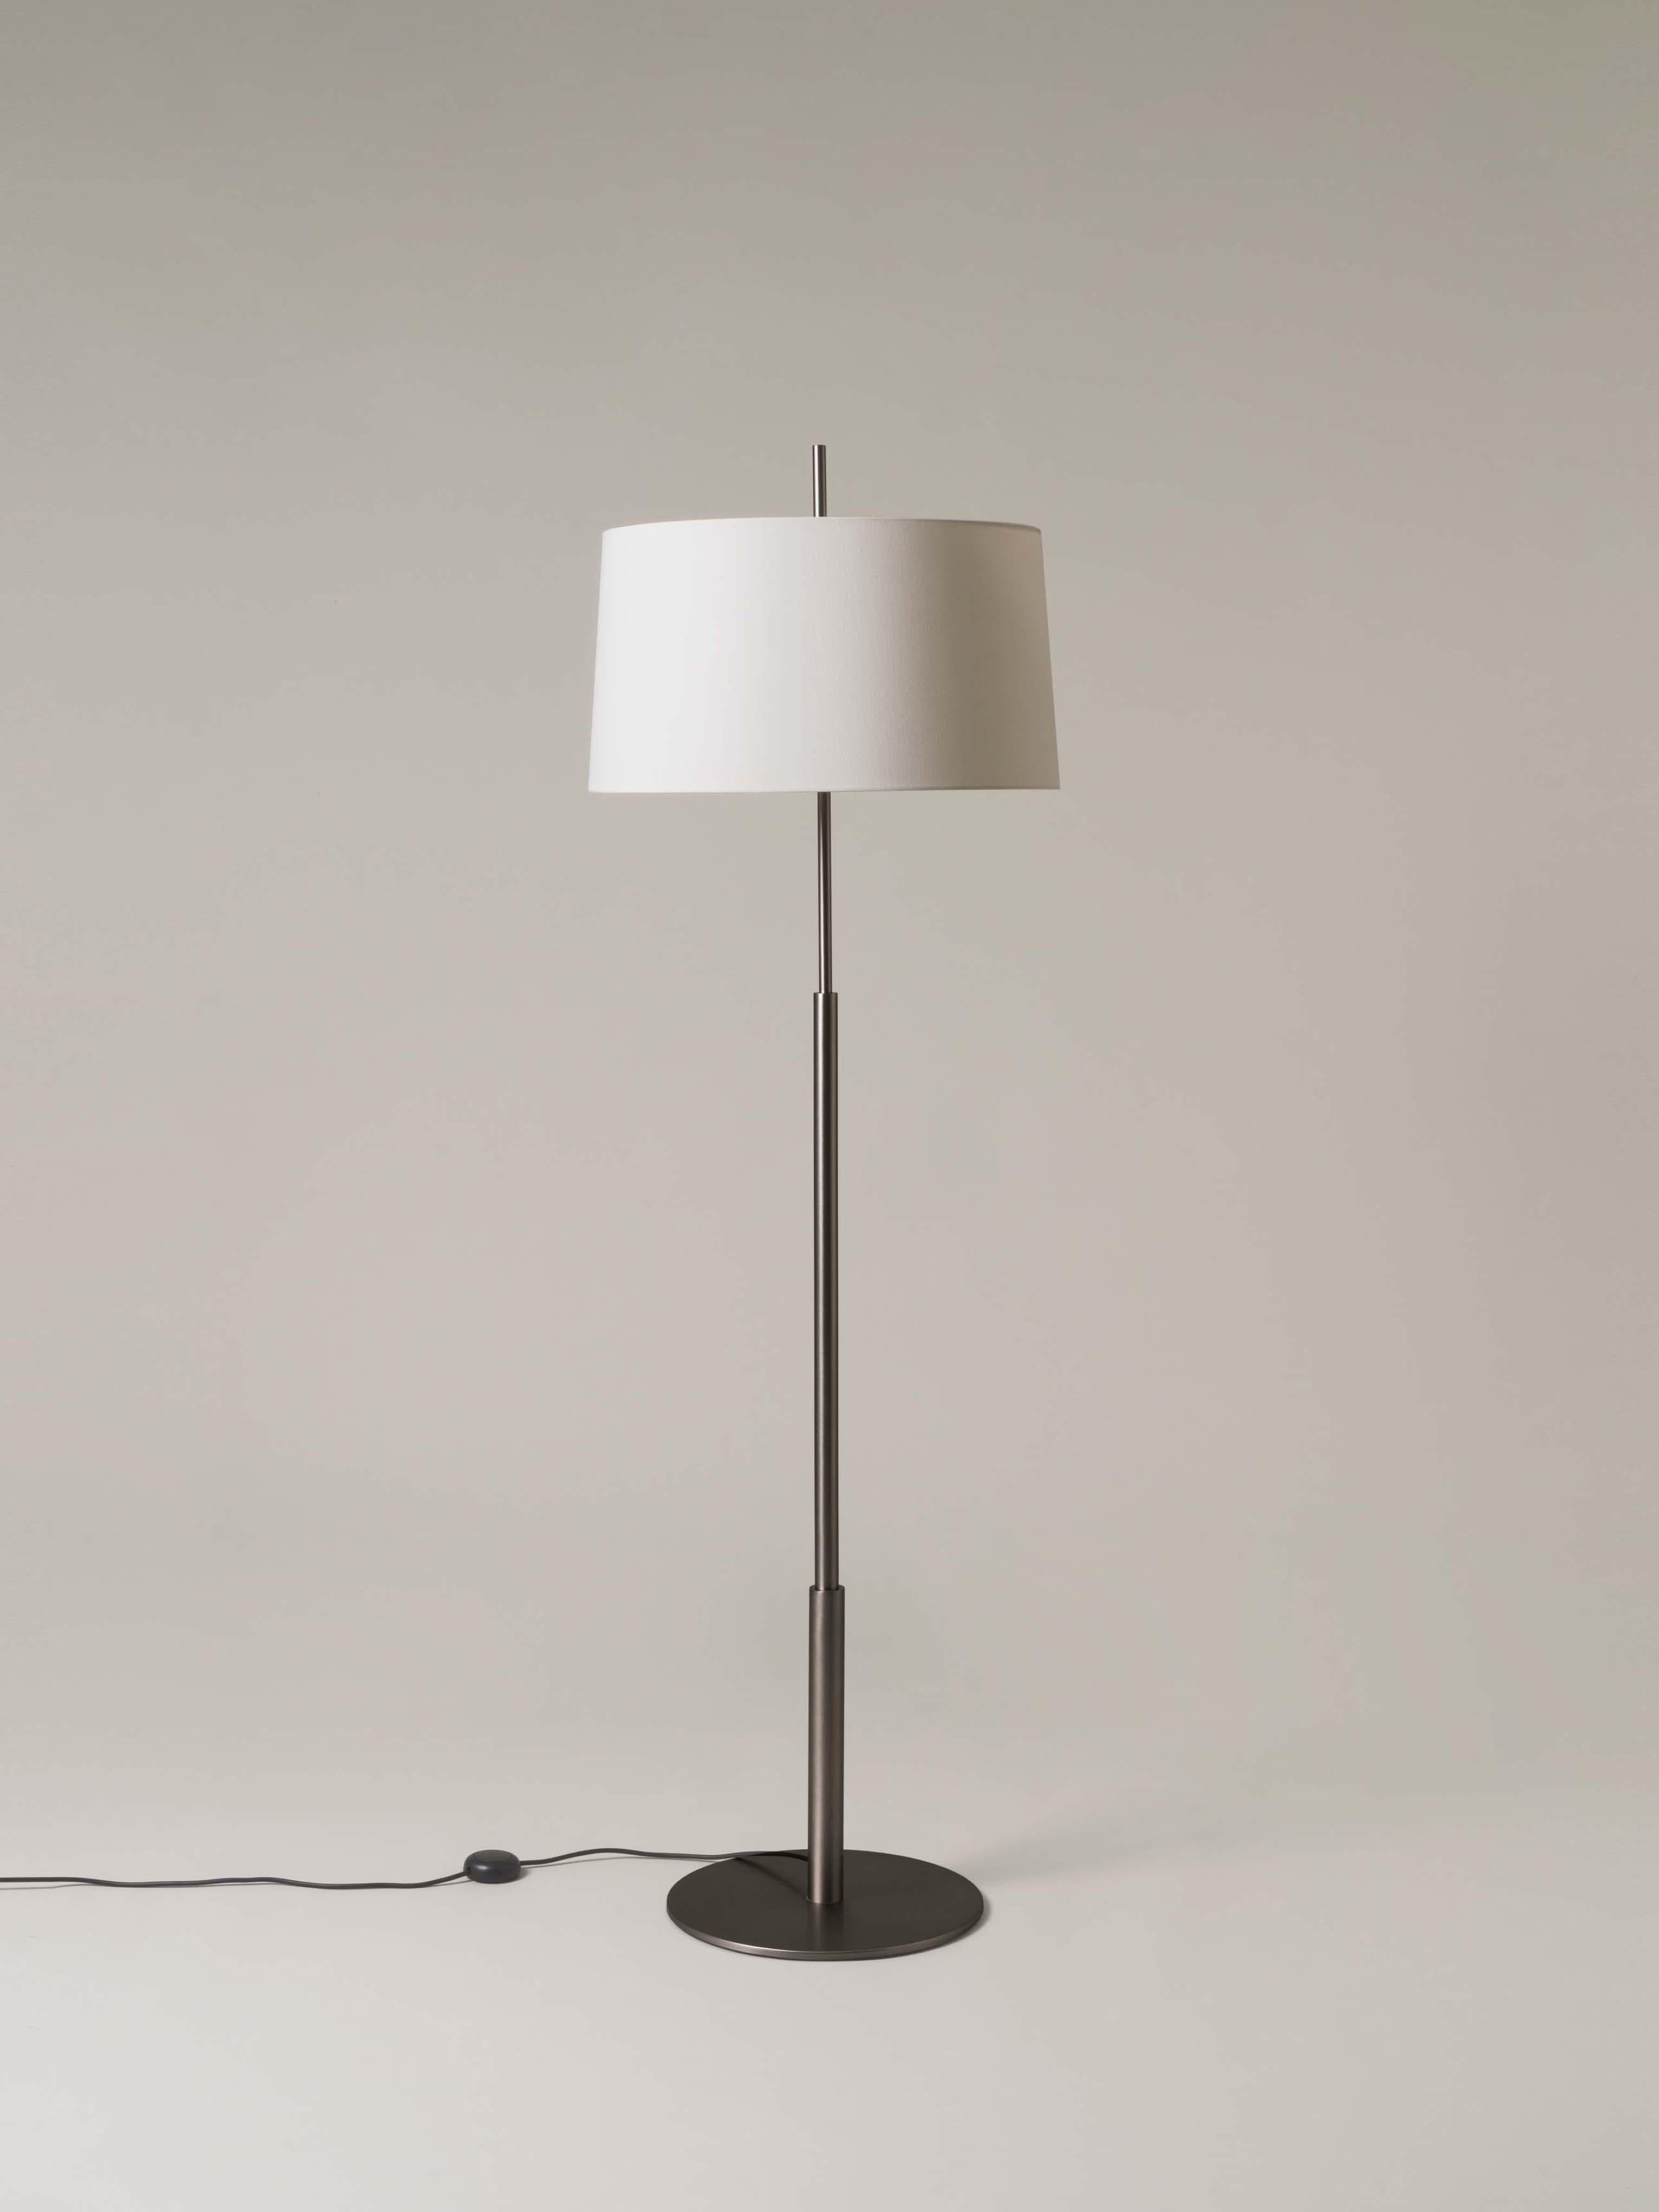 Nickel Diana floor lamp by Federico Correa, Alfonso Milá, Miguel Milá
Dimensions: D 58 x H 183 cm
Materials: Metal, linen.
Available in nickel or gold and in black or white shade.

In keeping with the calling of its creators, the Diana lamp has